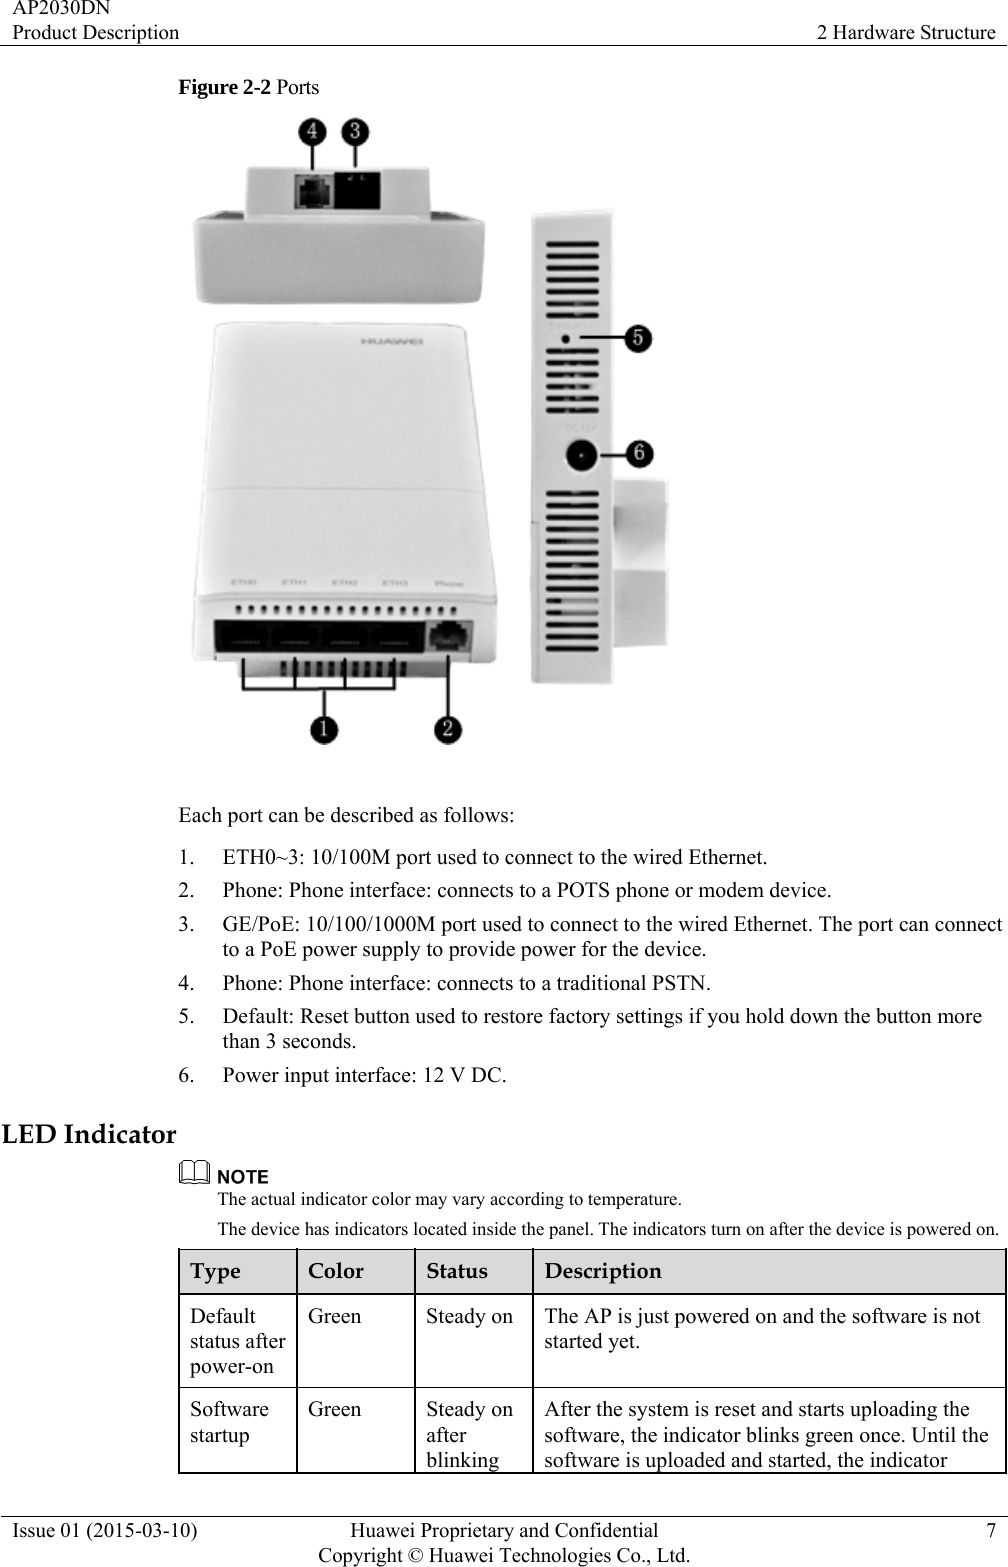 AP2030DN Product Description  2 Hardware Structure Issue 01 (2015-03-10)  Huawei Proprietary and Confidential         Copyright © Huawei Technologies Co., Ltd.7 Figure 2-2 Ports   Each port can be described as follows: 1. ETH0~3: 10/100M port used to connect to the wired Ethernet. 2. Phone: Phone interface: connects to a POTS phone or modem device. 3. GE/PoE: 10/100/1000M port used to connect to the wired Ethernet. The port can connect to a PoE power supply to provide power for the device. 4. Phone: Phone interface: connects to a traditional PSTN. 5. Default: Reset button used to restore factory settings if you hold down the button more than 3 seconds. 6. Power input interface: 12 V DC. LED Indicator  The actual indicator color may vary according to temperature. The device has indicators located inside the panel. The indicators turn on after the device is powered on. Type  Color  Status  Description Default status after power-on Green  Steady on  The AP is just powered on and the software is not started yet. Software startup Green Steady on after blinking After the system is reset and starts uploading the software, the indicator blinks green once. Until the software is uploaded and started, the indicator 